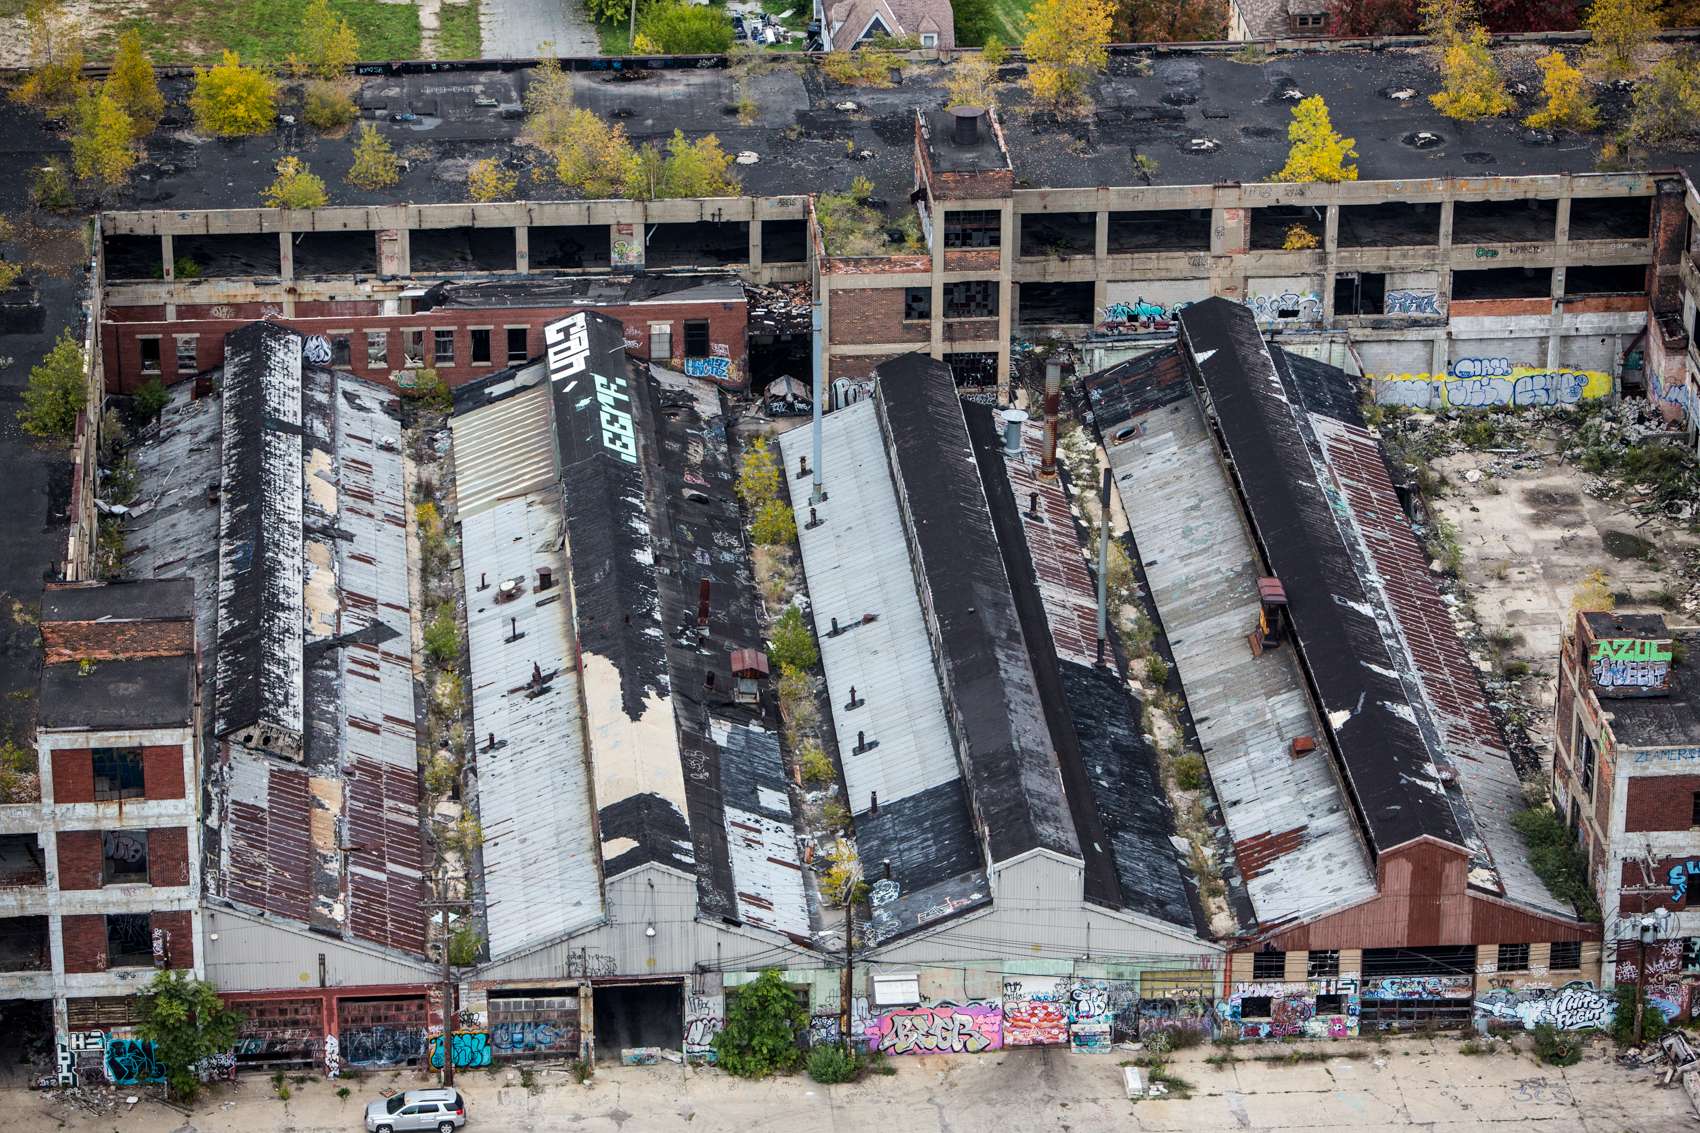 The Packard Automotive Plant, built in the early 1900s, is now in ruins. At over three million square feet, it was regarded as one of the most sophisticated production facilities of its kind when it opened in 1903.